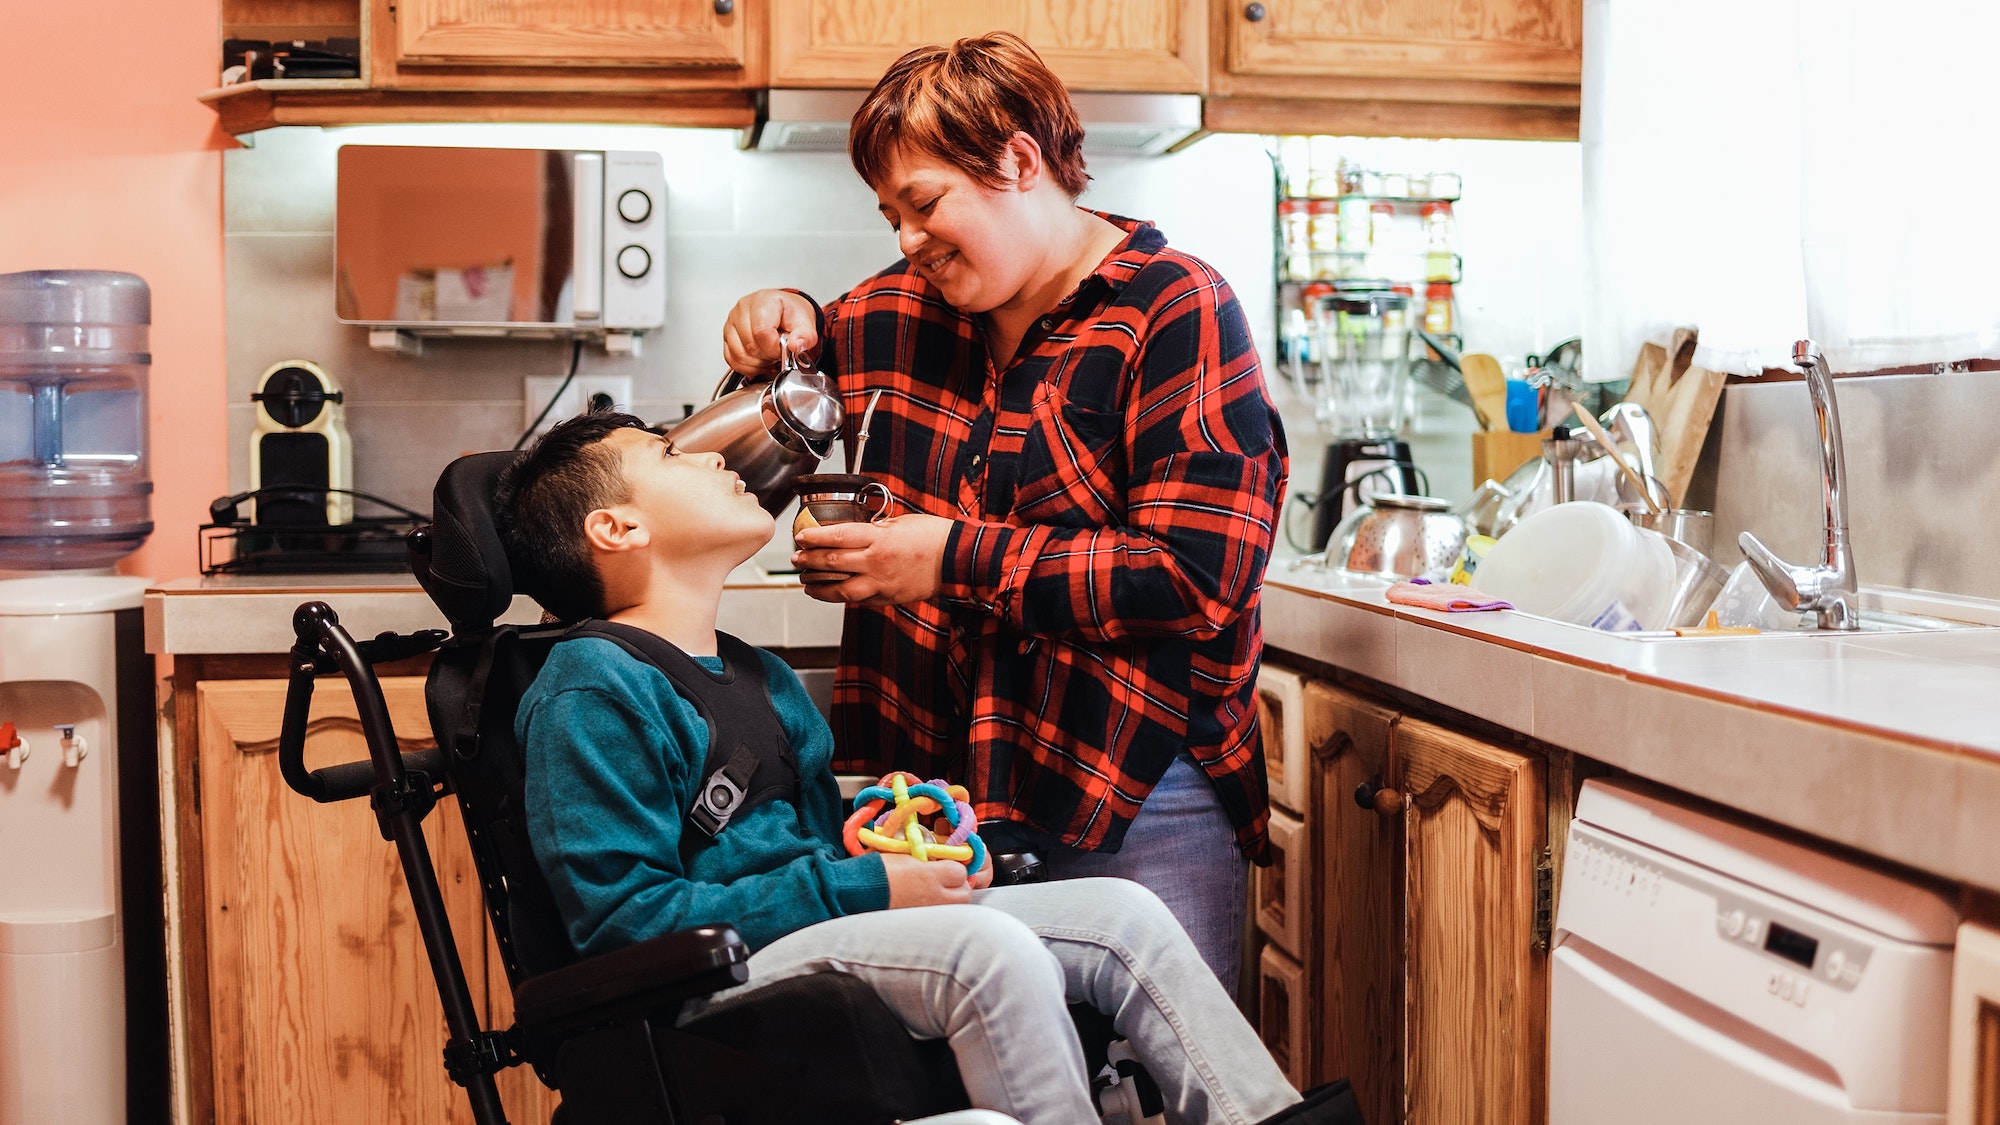 Latin mother taking care of son with disability on wheelchair at home kitchen - Focus on mom face